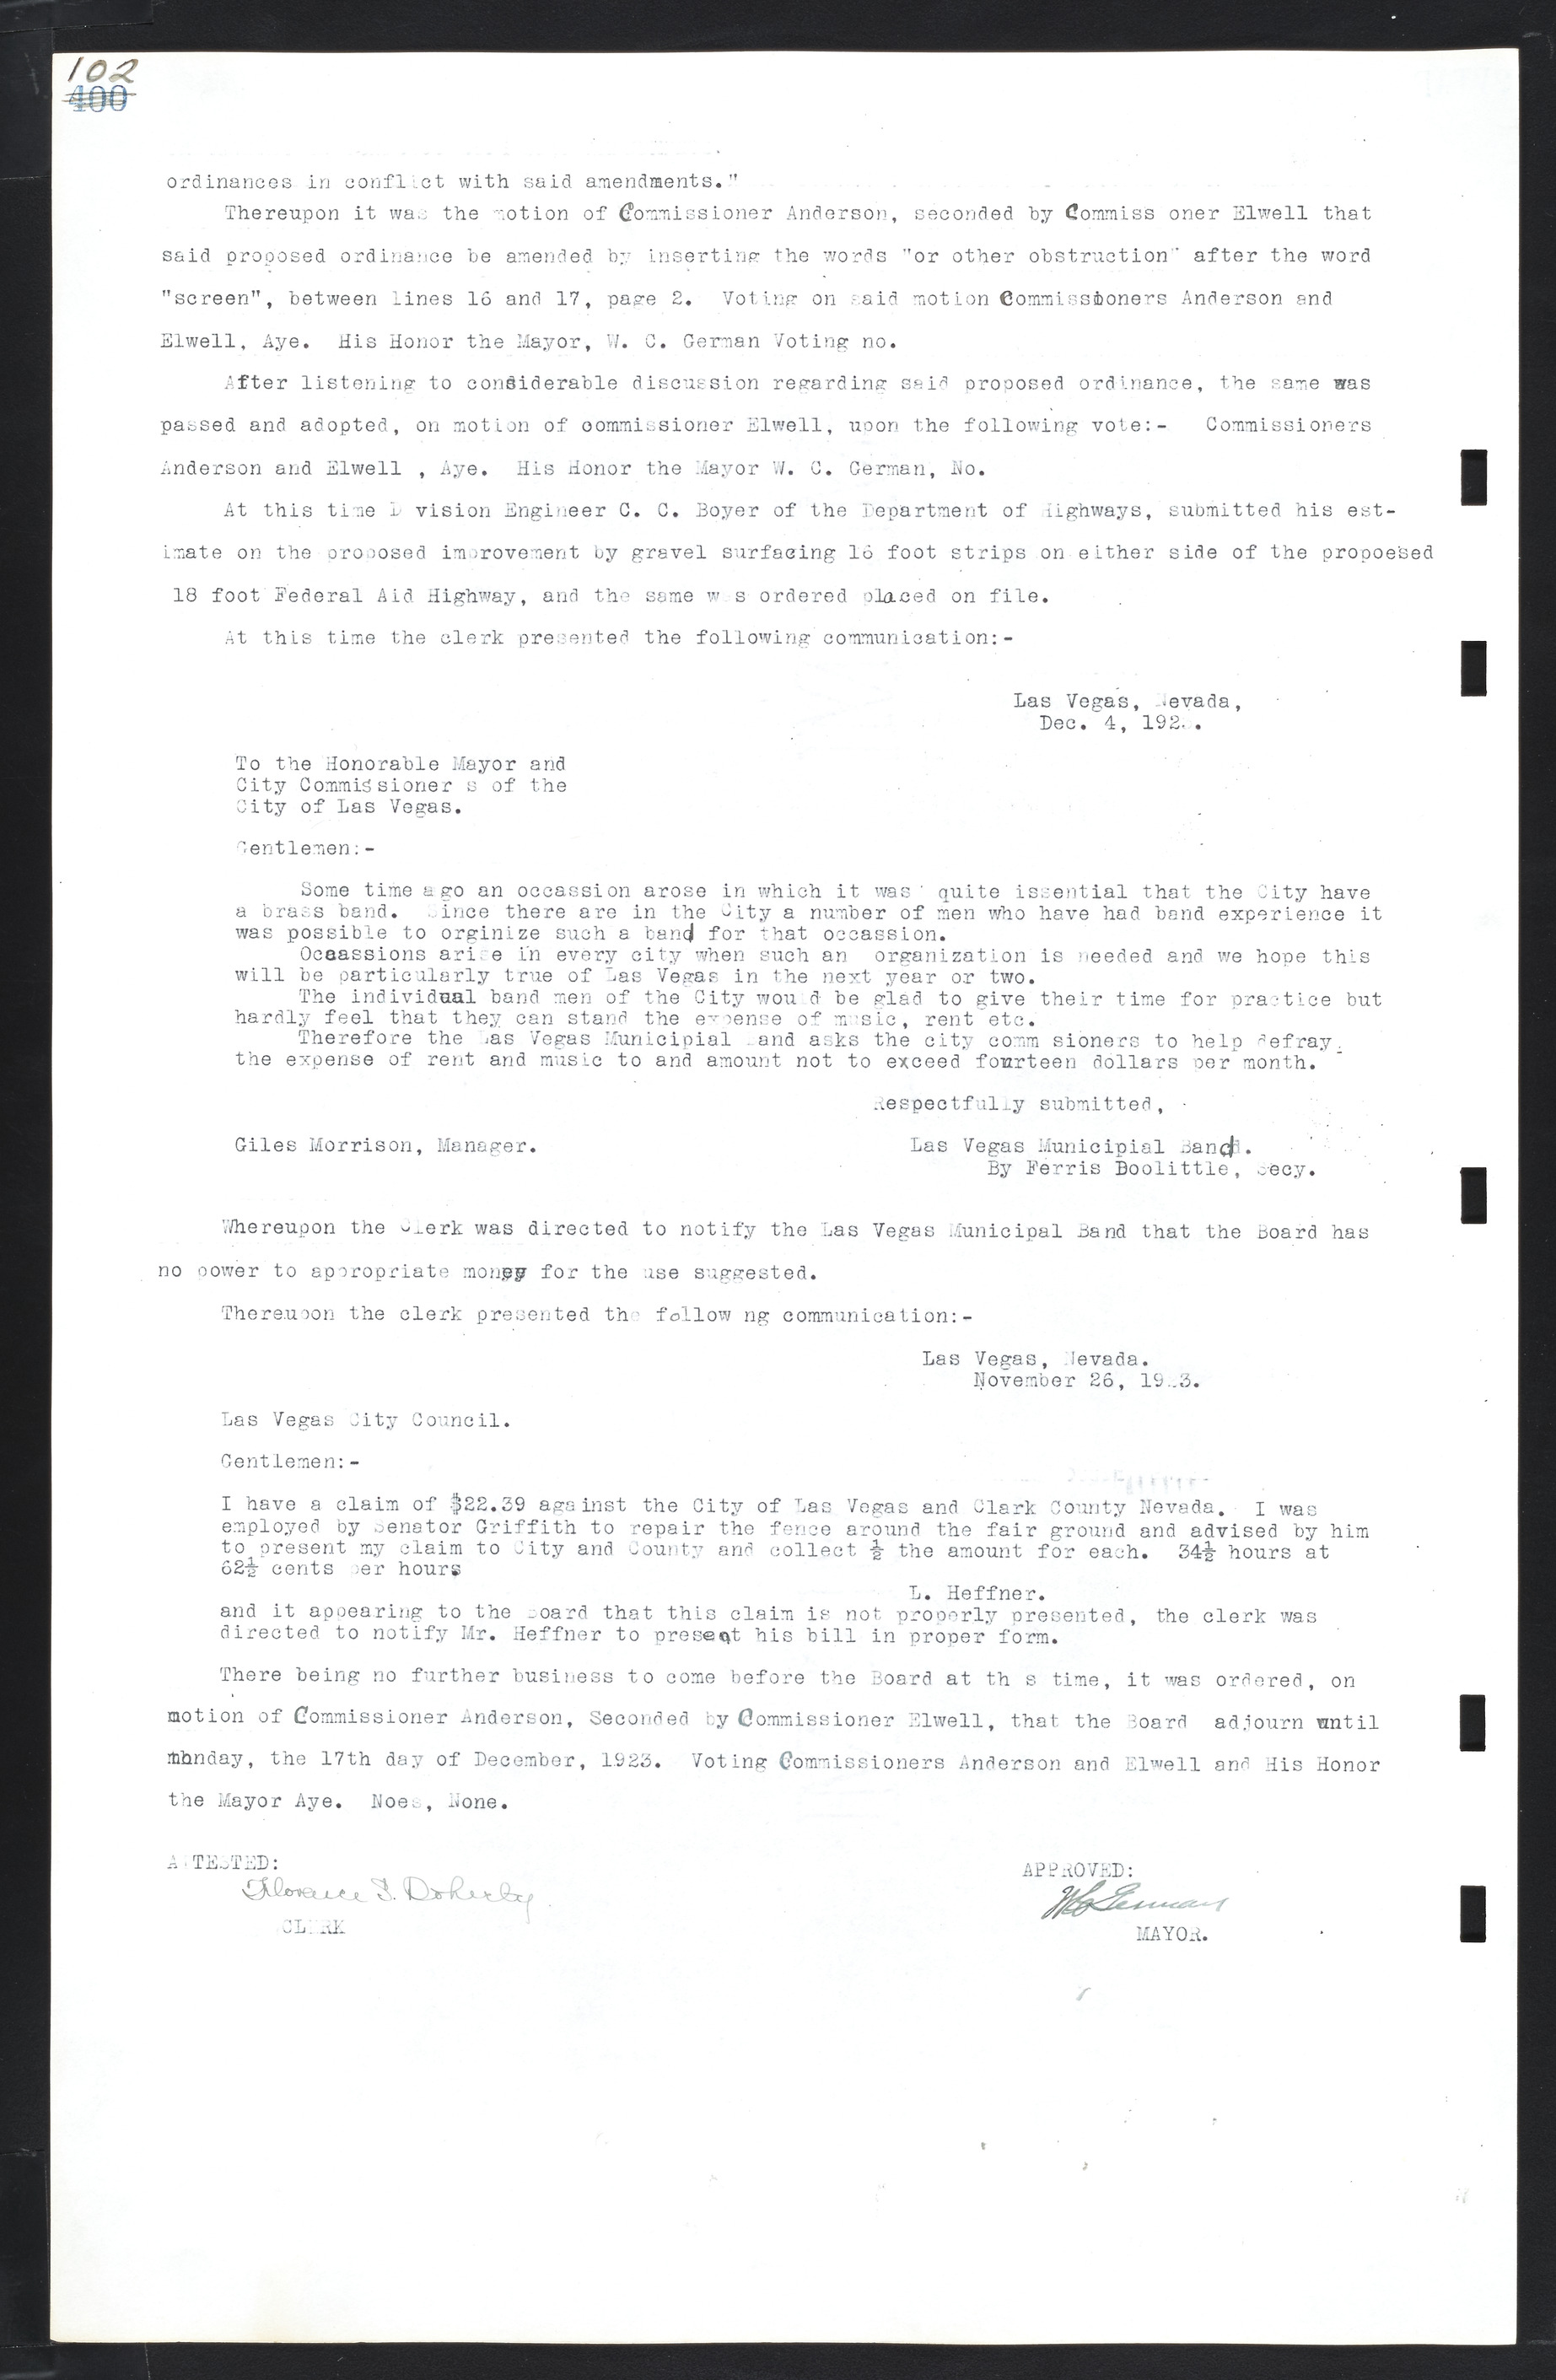 Las Vegas City Commission Minutes, March 1, 1922 to May 10, 1929, lvc000002-109